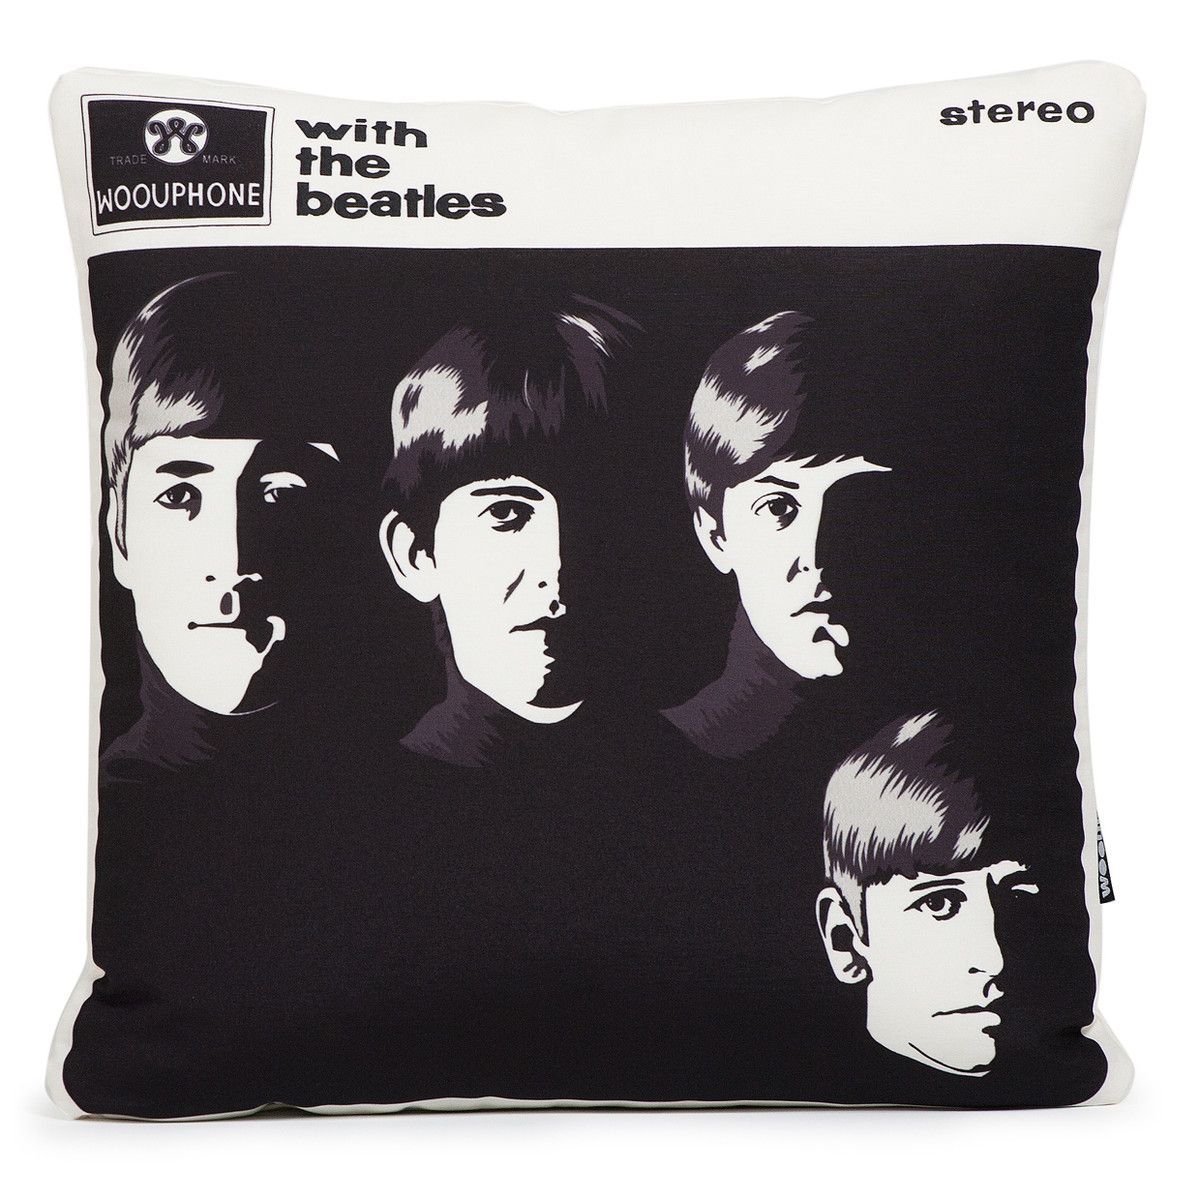 With The Beatles Pillow.